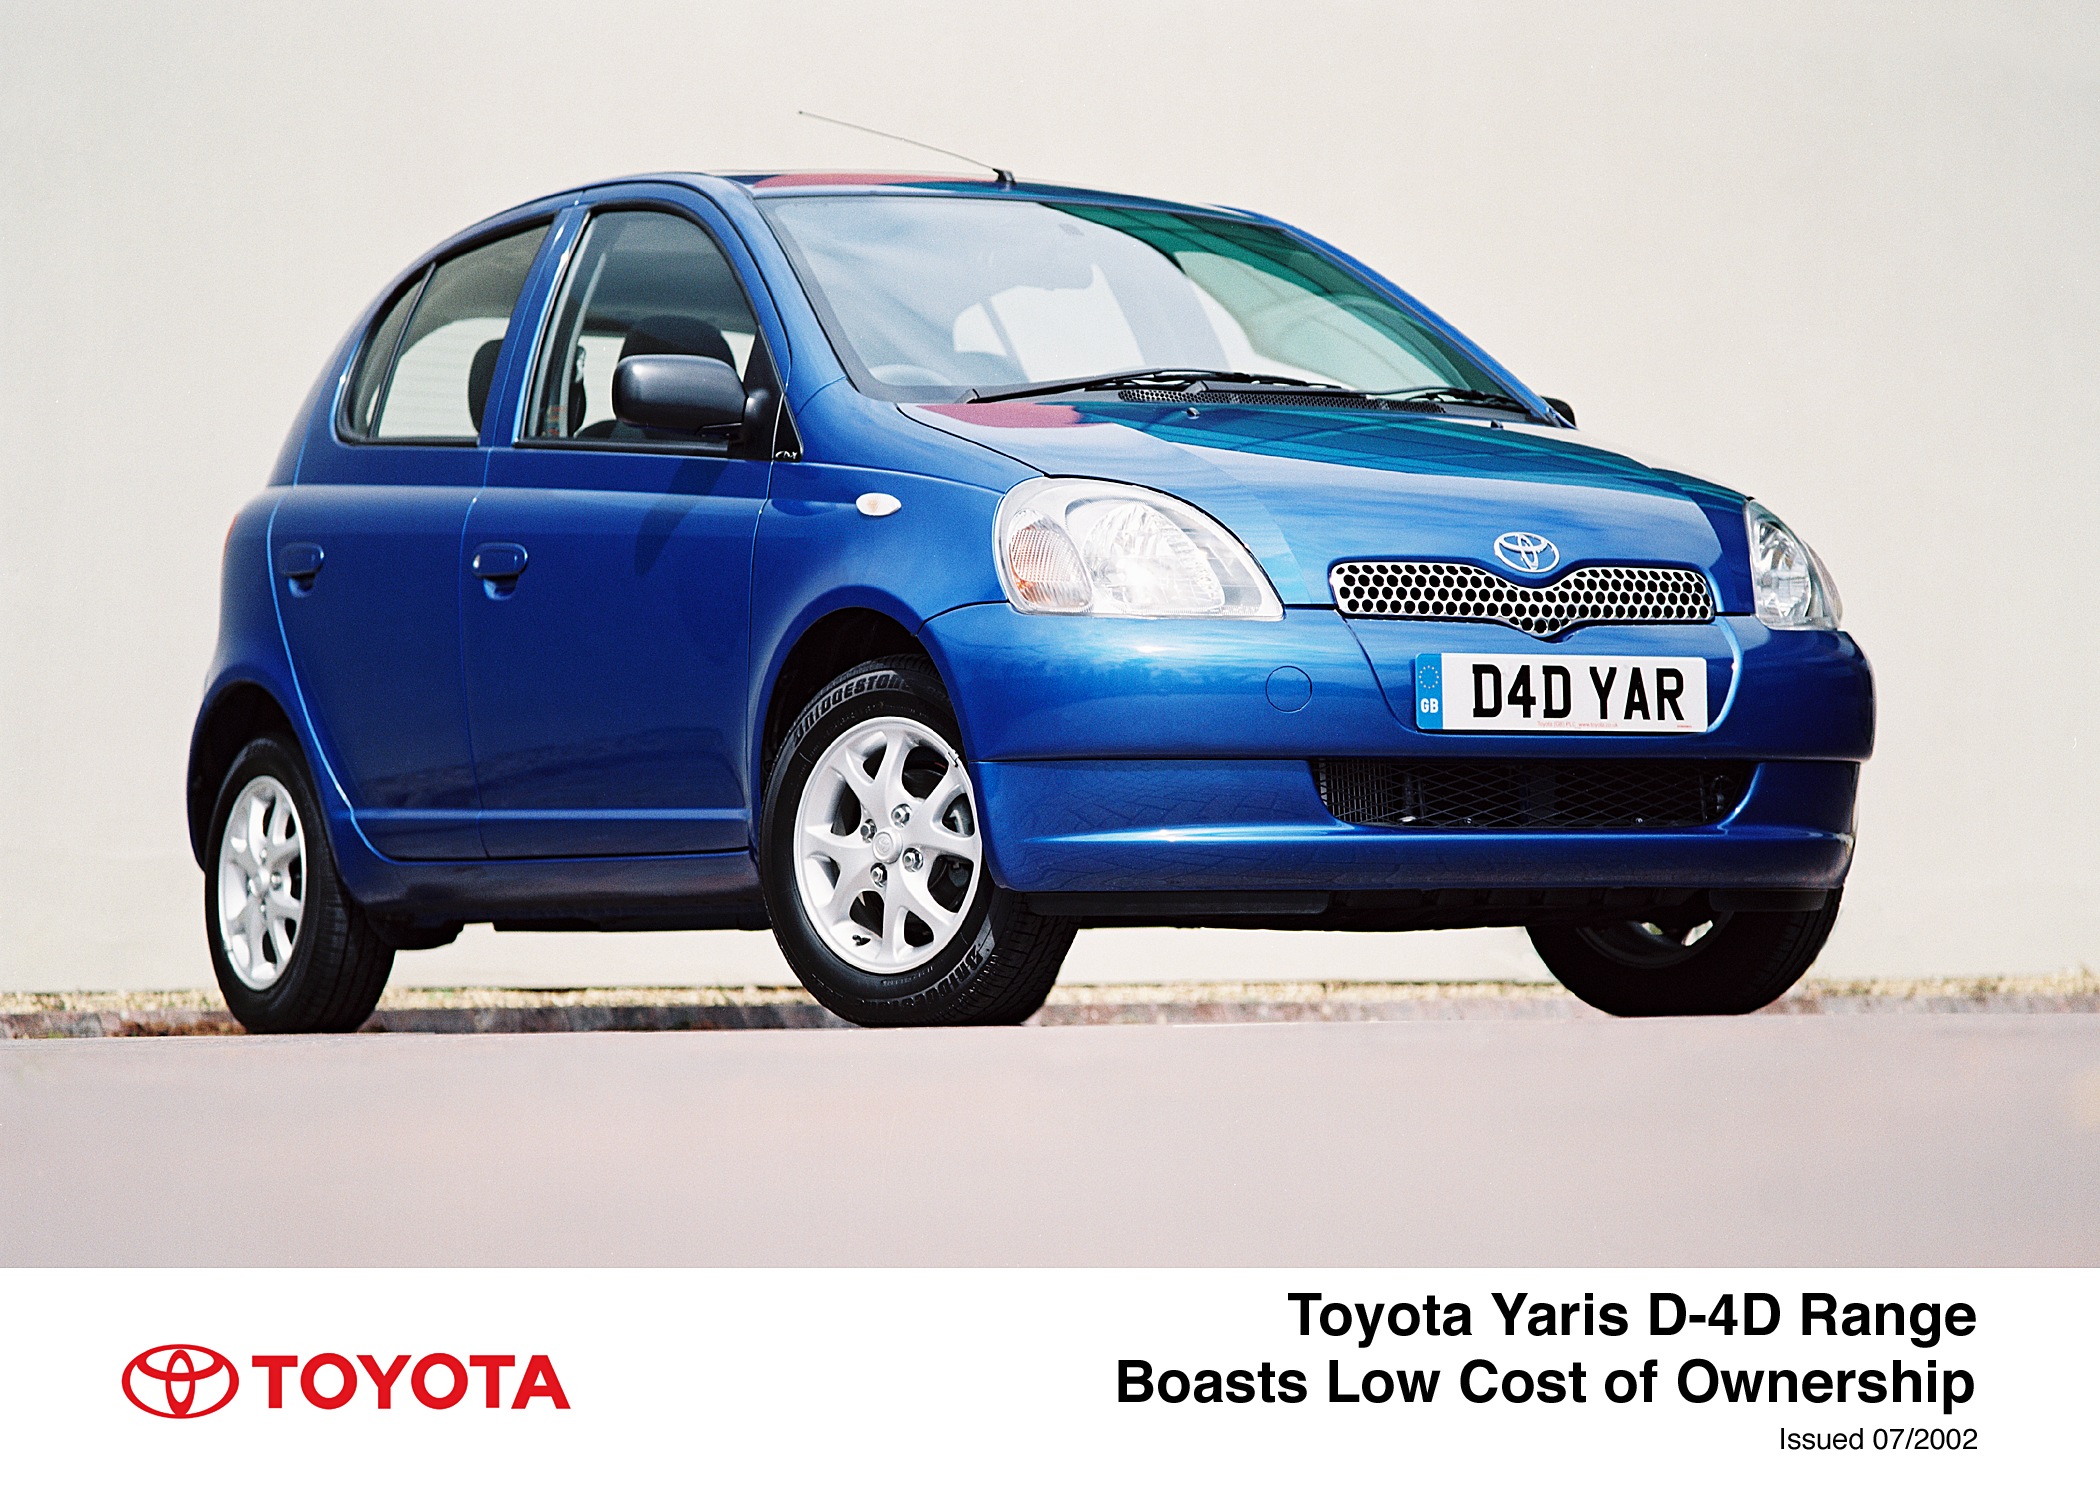 Toyota Yaris D4D Continued Sales Success And Low Cost Of